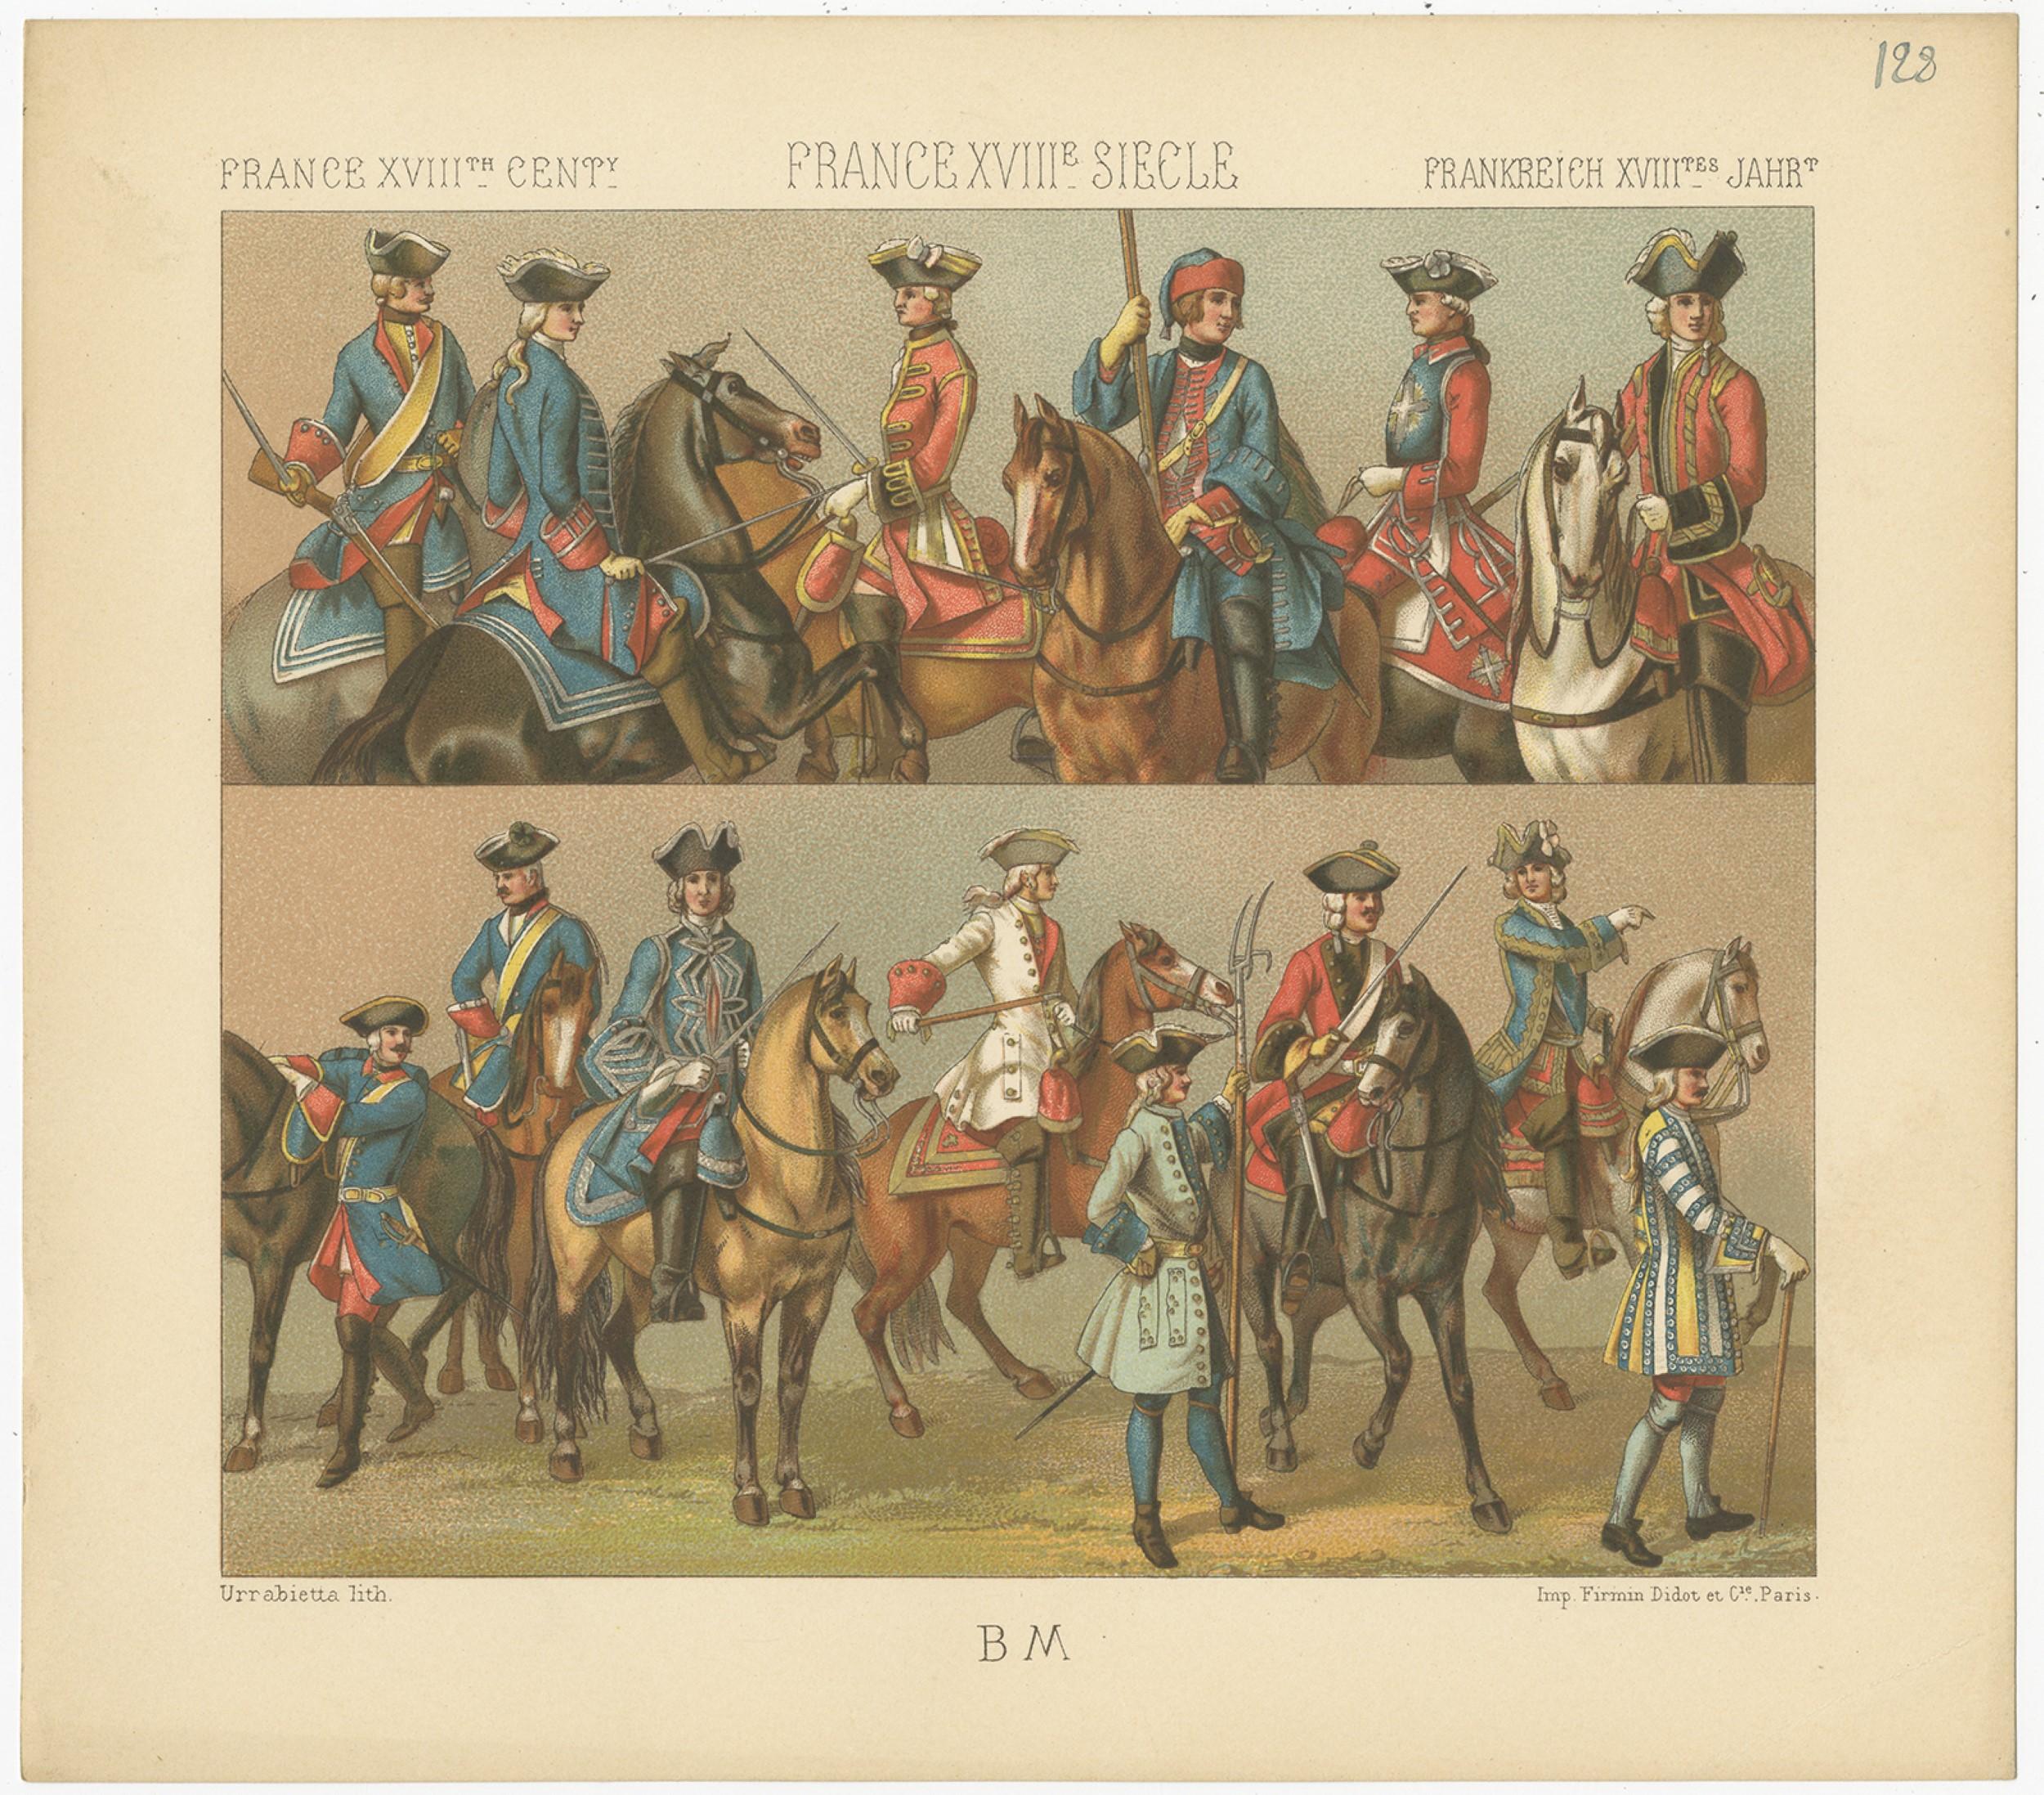 Antique print titled 'France XVIIIth Cent - France XVIIIe, Siecle - Frankreich XVIIItes Jahr'. Chromolithograph of French 18th century military outfits. This print originates from 'Le Costume Historique' by M.A. Racinet. Published, circa